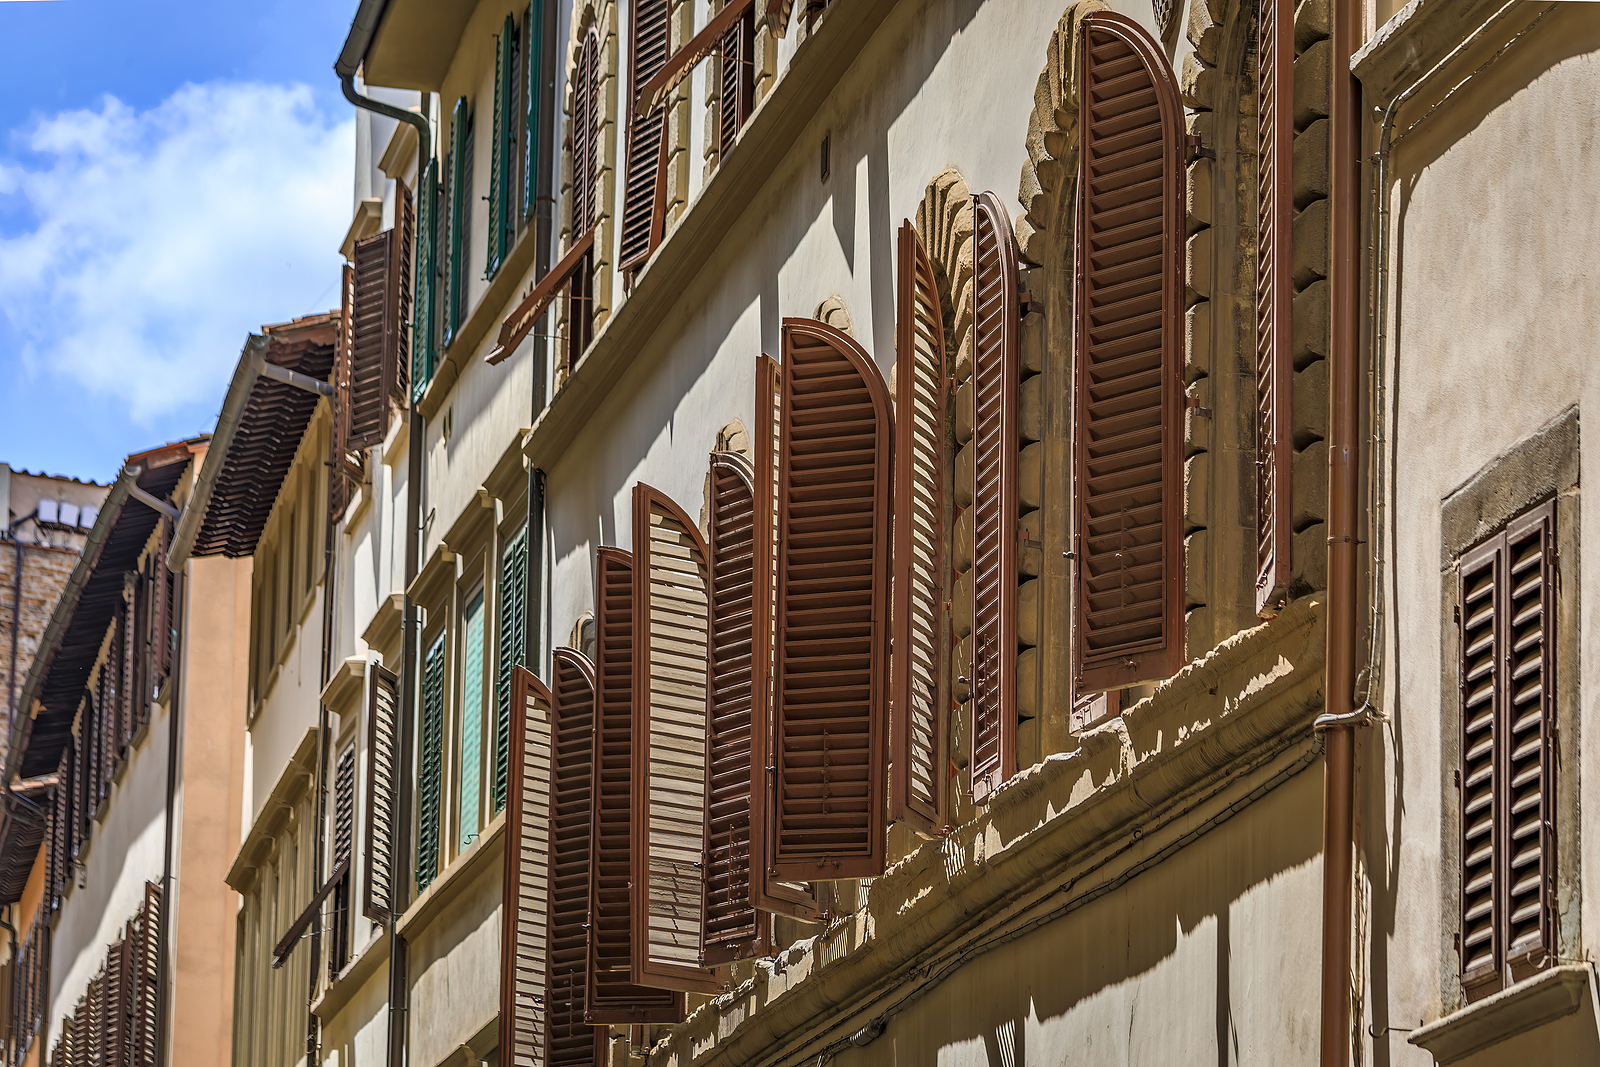 Arched Wooden Shutters On A Building Near Santa Croce Basilica,